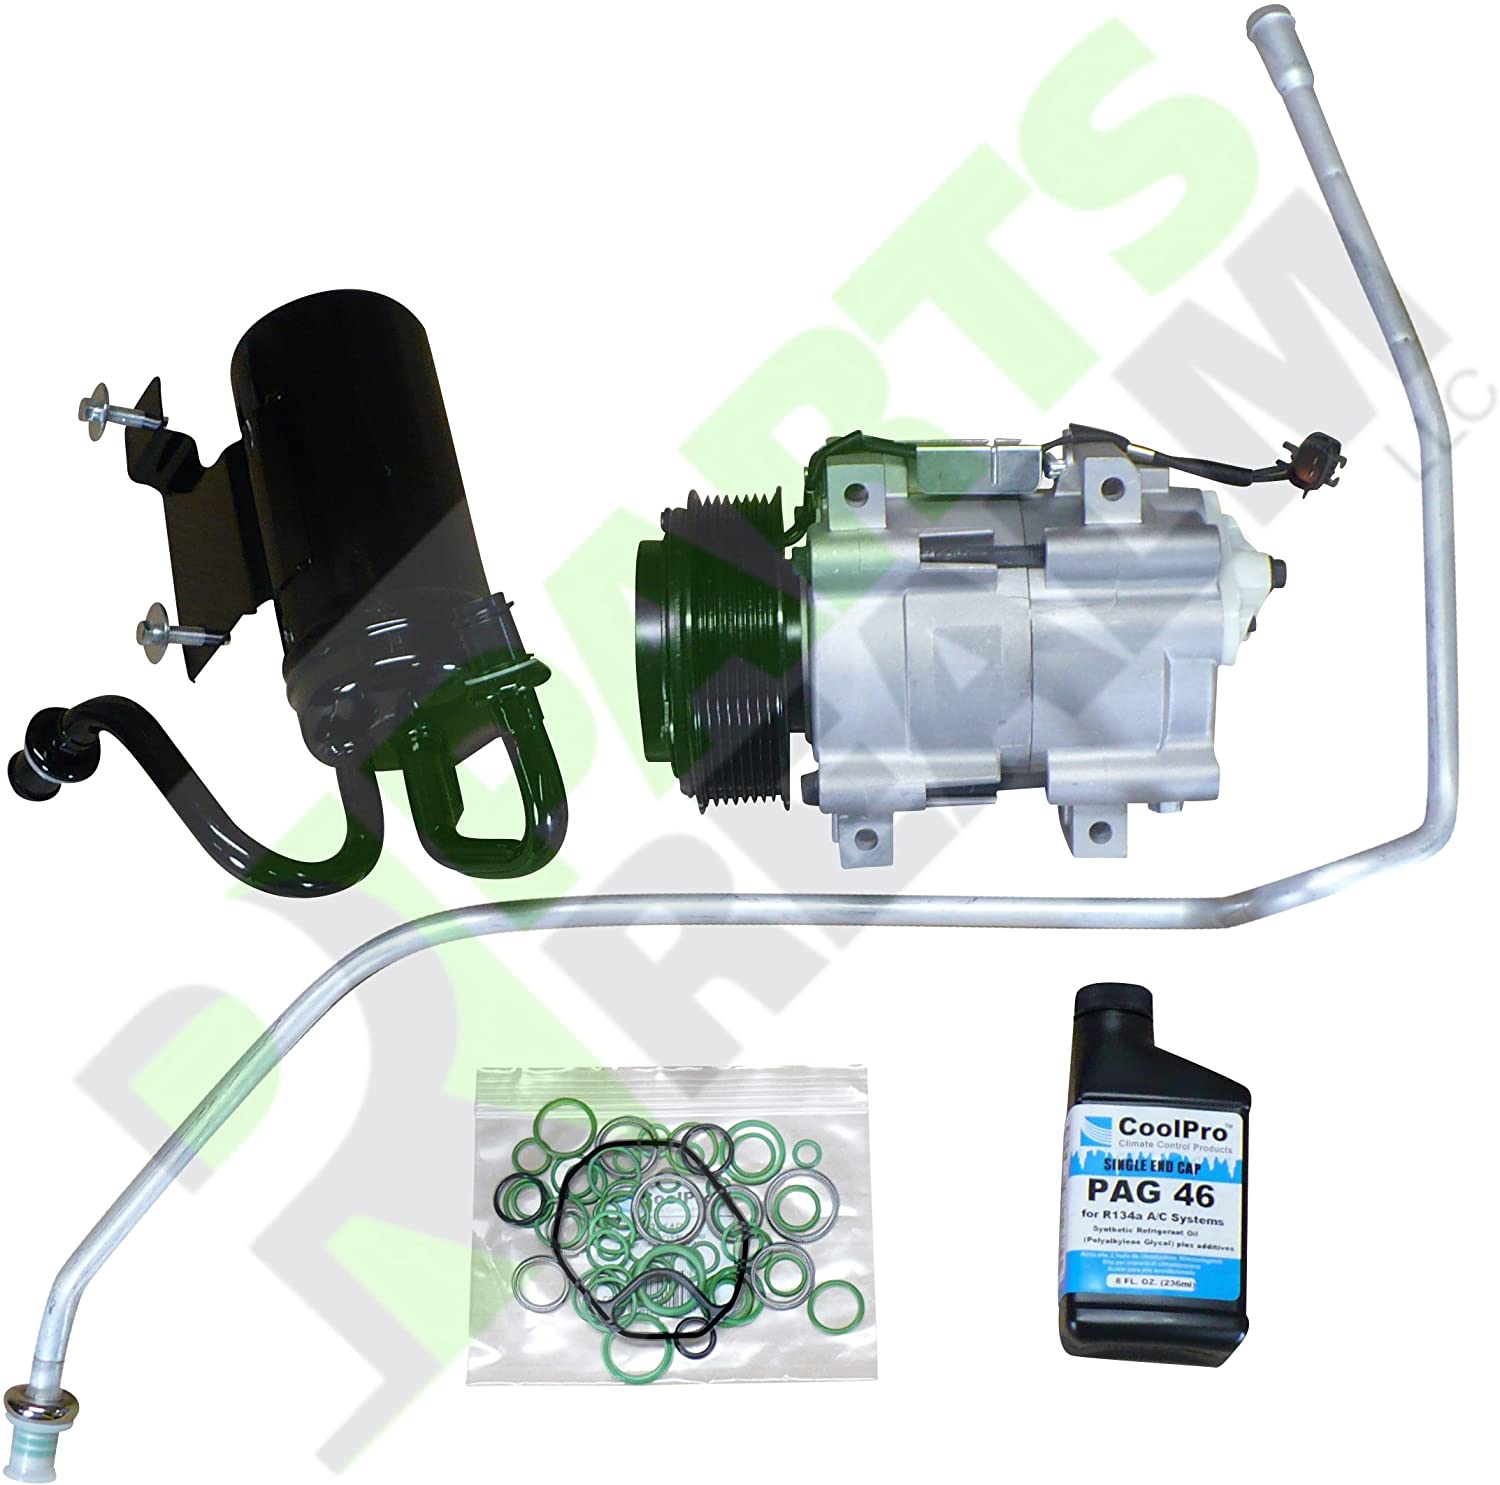 Parts Realm CO-0220RK Complete Compressor Replacement Kit - Reman Fits Dodge Ram R2500 R3500 5.9L Diesel, 6.7L Trucks 2006 2007 2008 2009 with Comp, Accum, Liquid Line with Orifice, Oil, and O-rings.